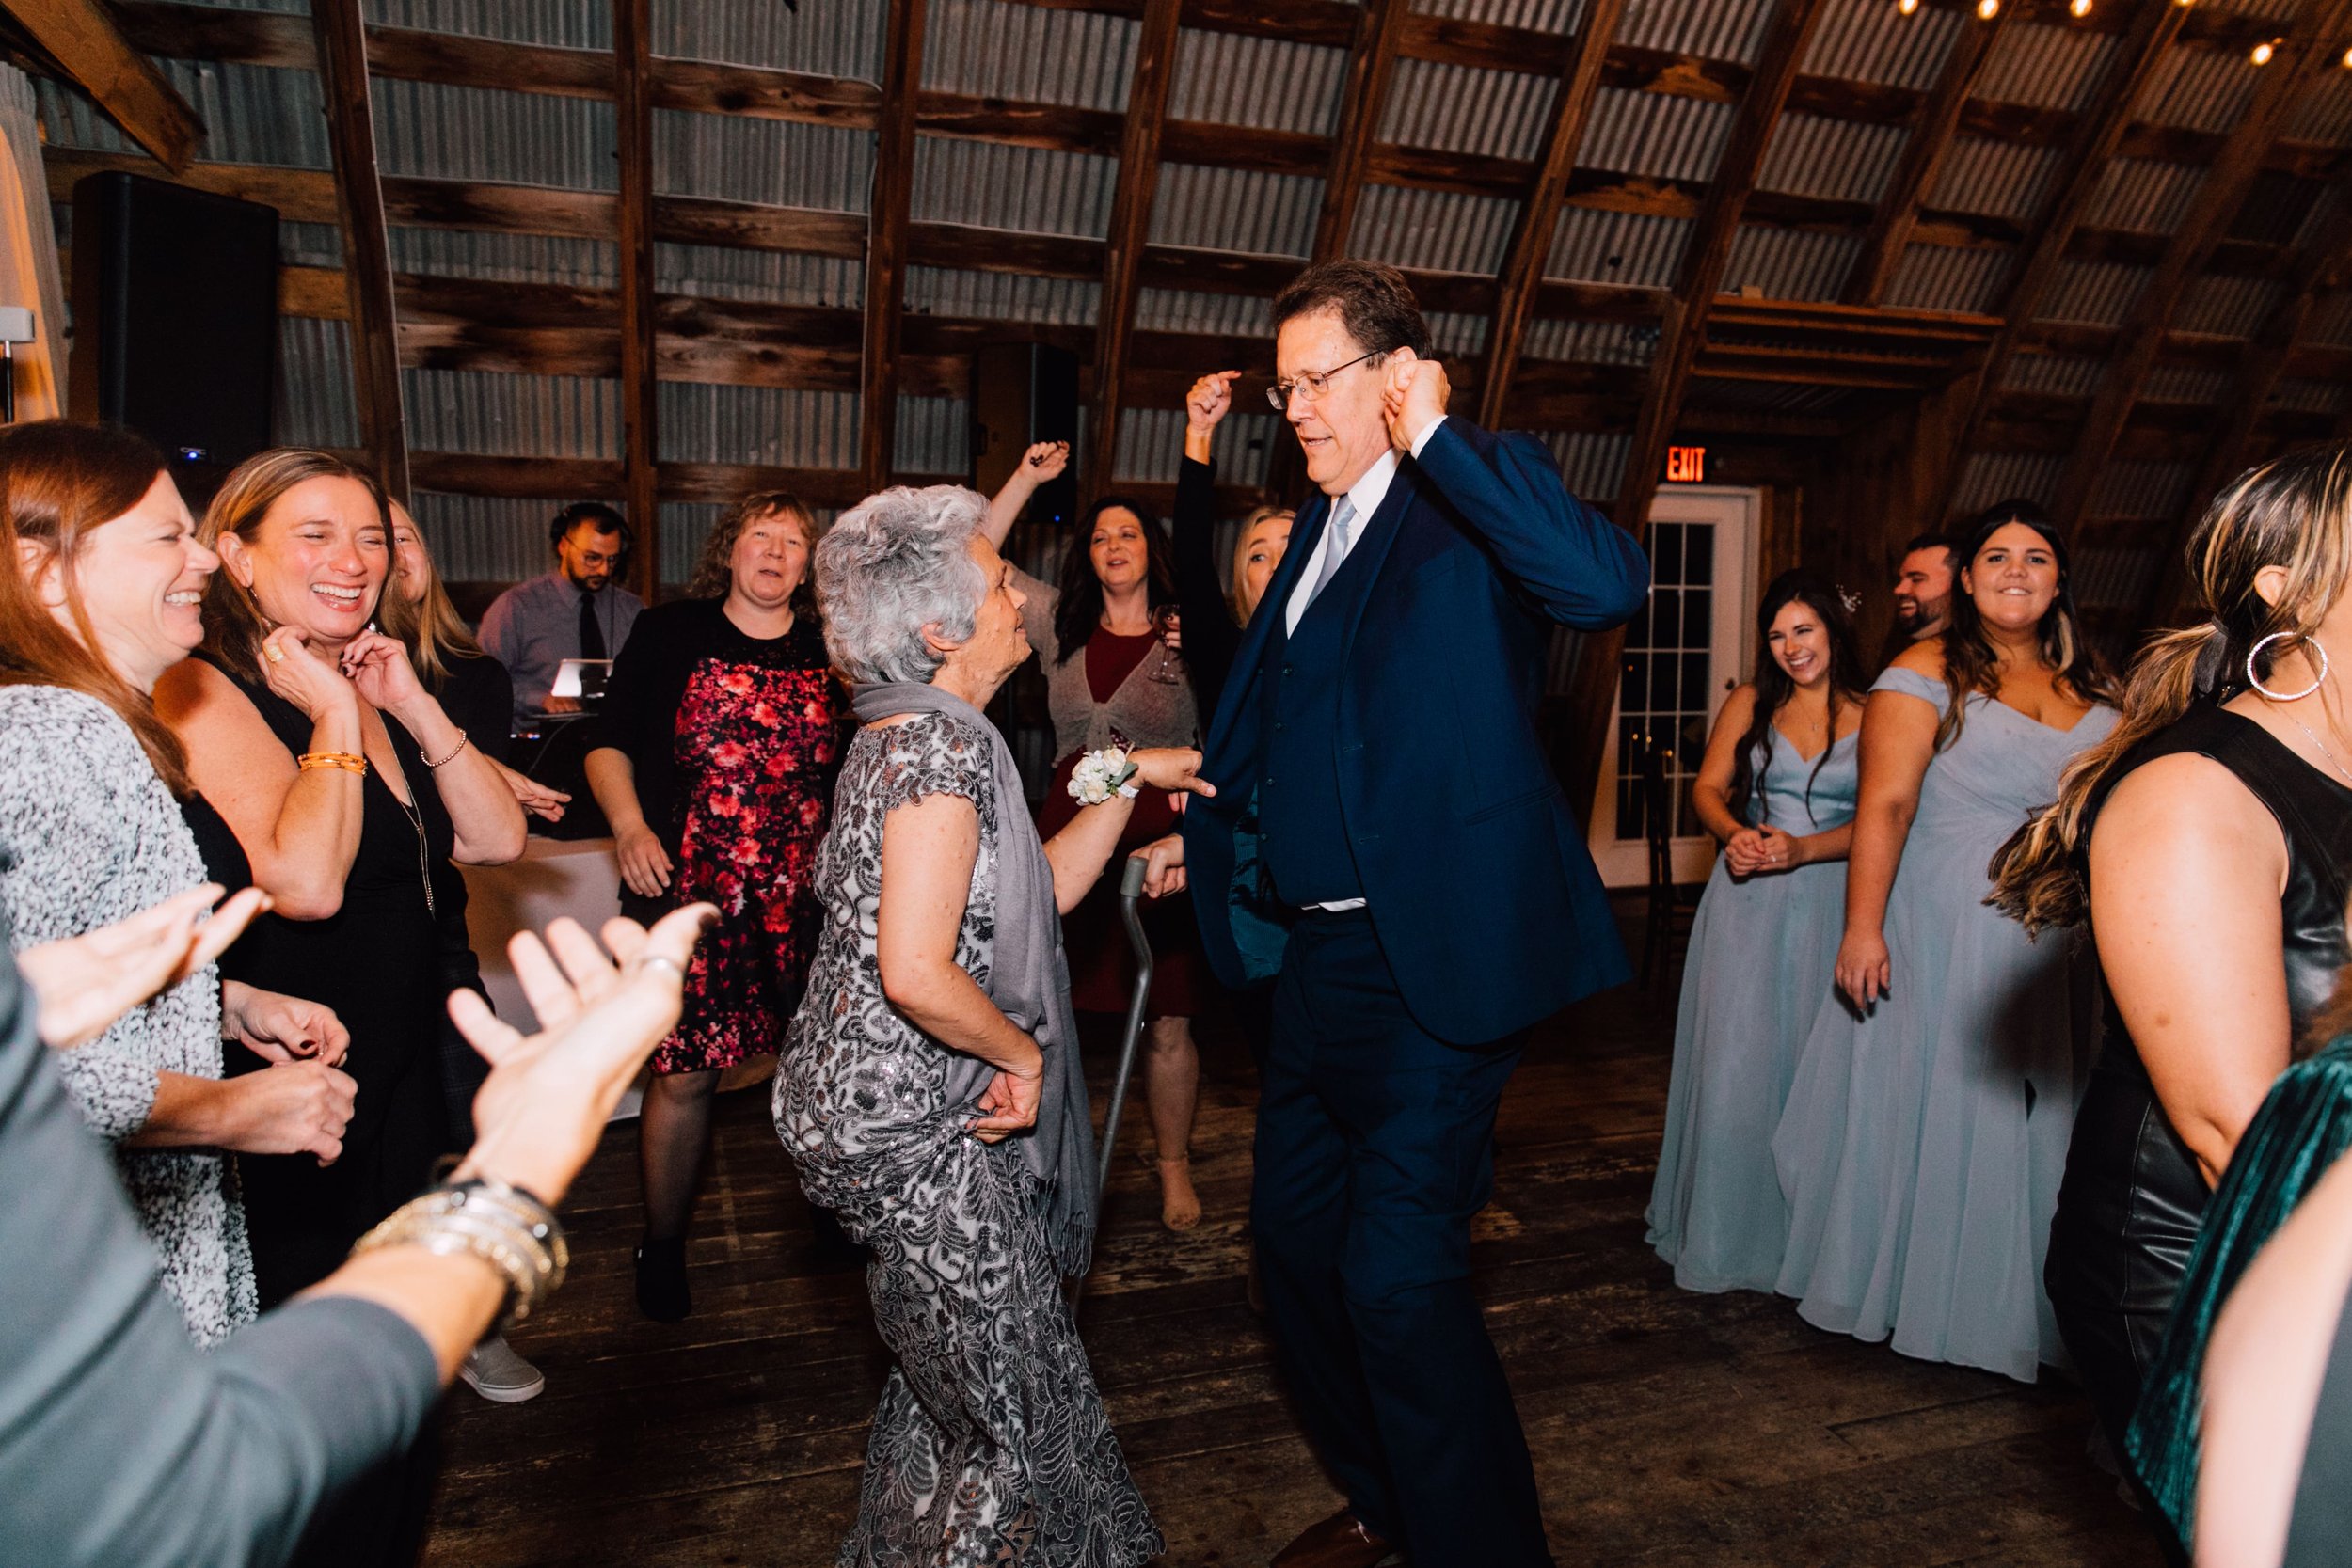  wedding guests and parents of the groom dance at an elegant barn wedding 